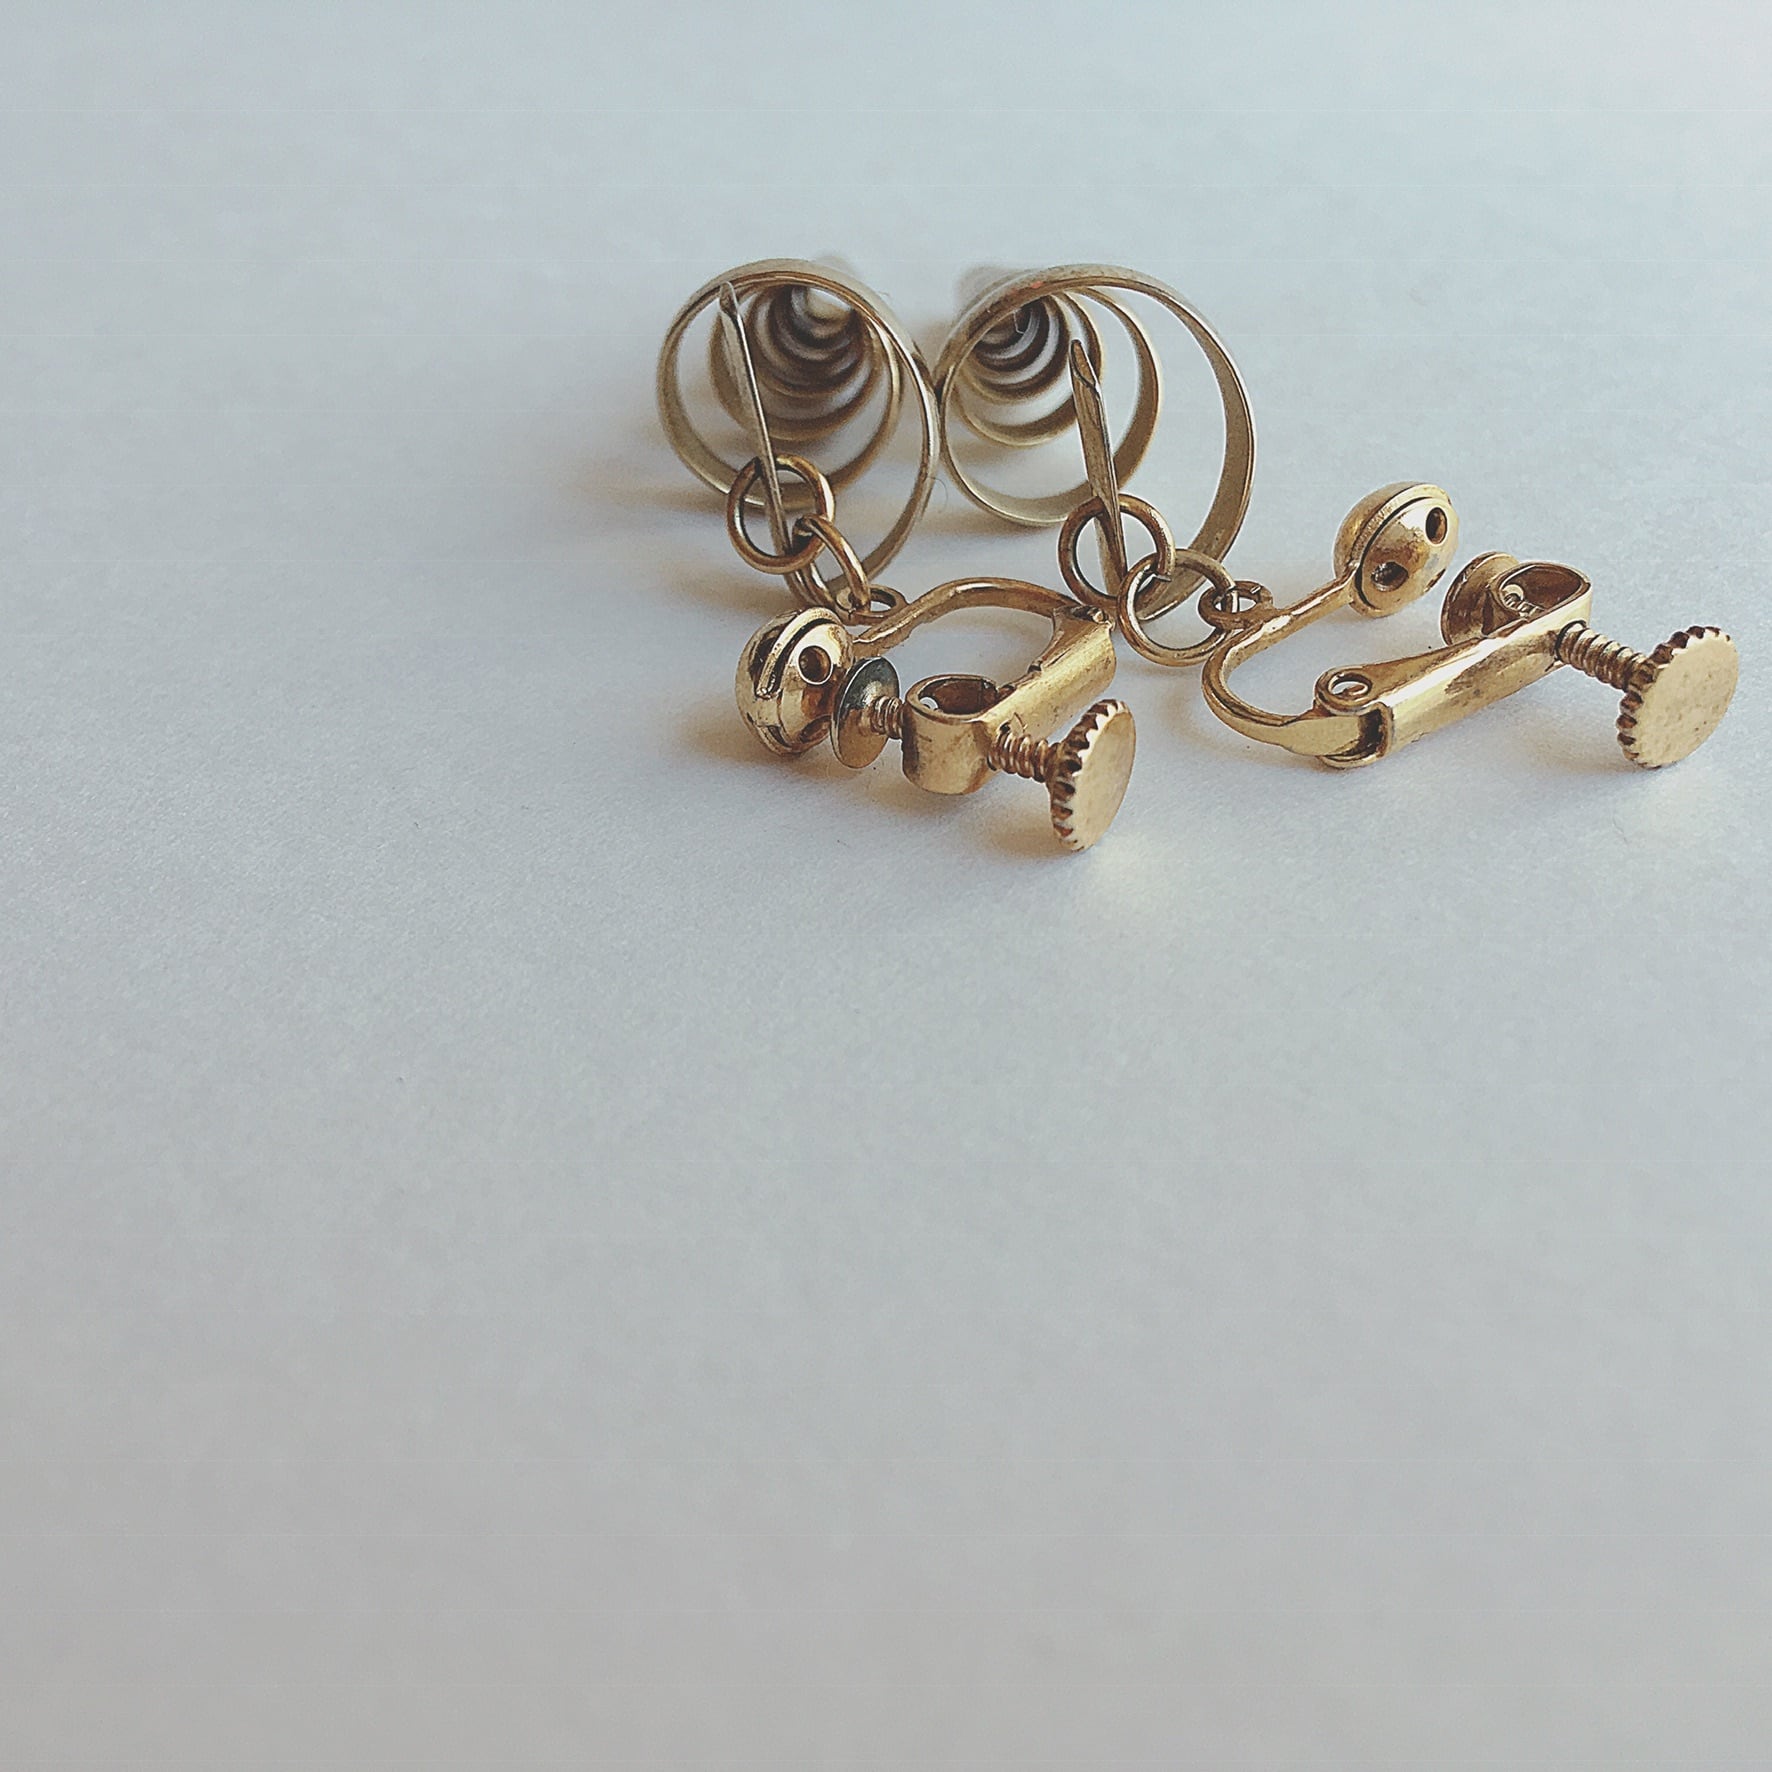 Vintage gold tone spiral earrings ヴィンテージ ゴールド スパイラル 螺旋 渦 イヤリング t27 b483  OBAKEPEACH